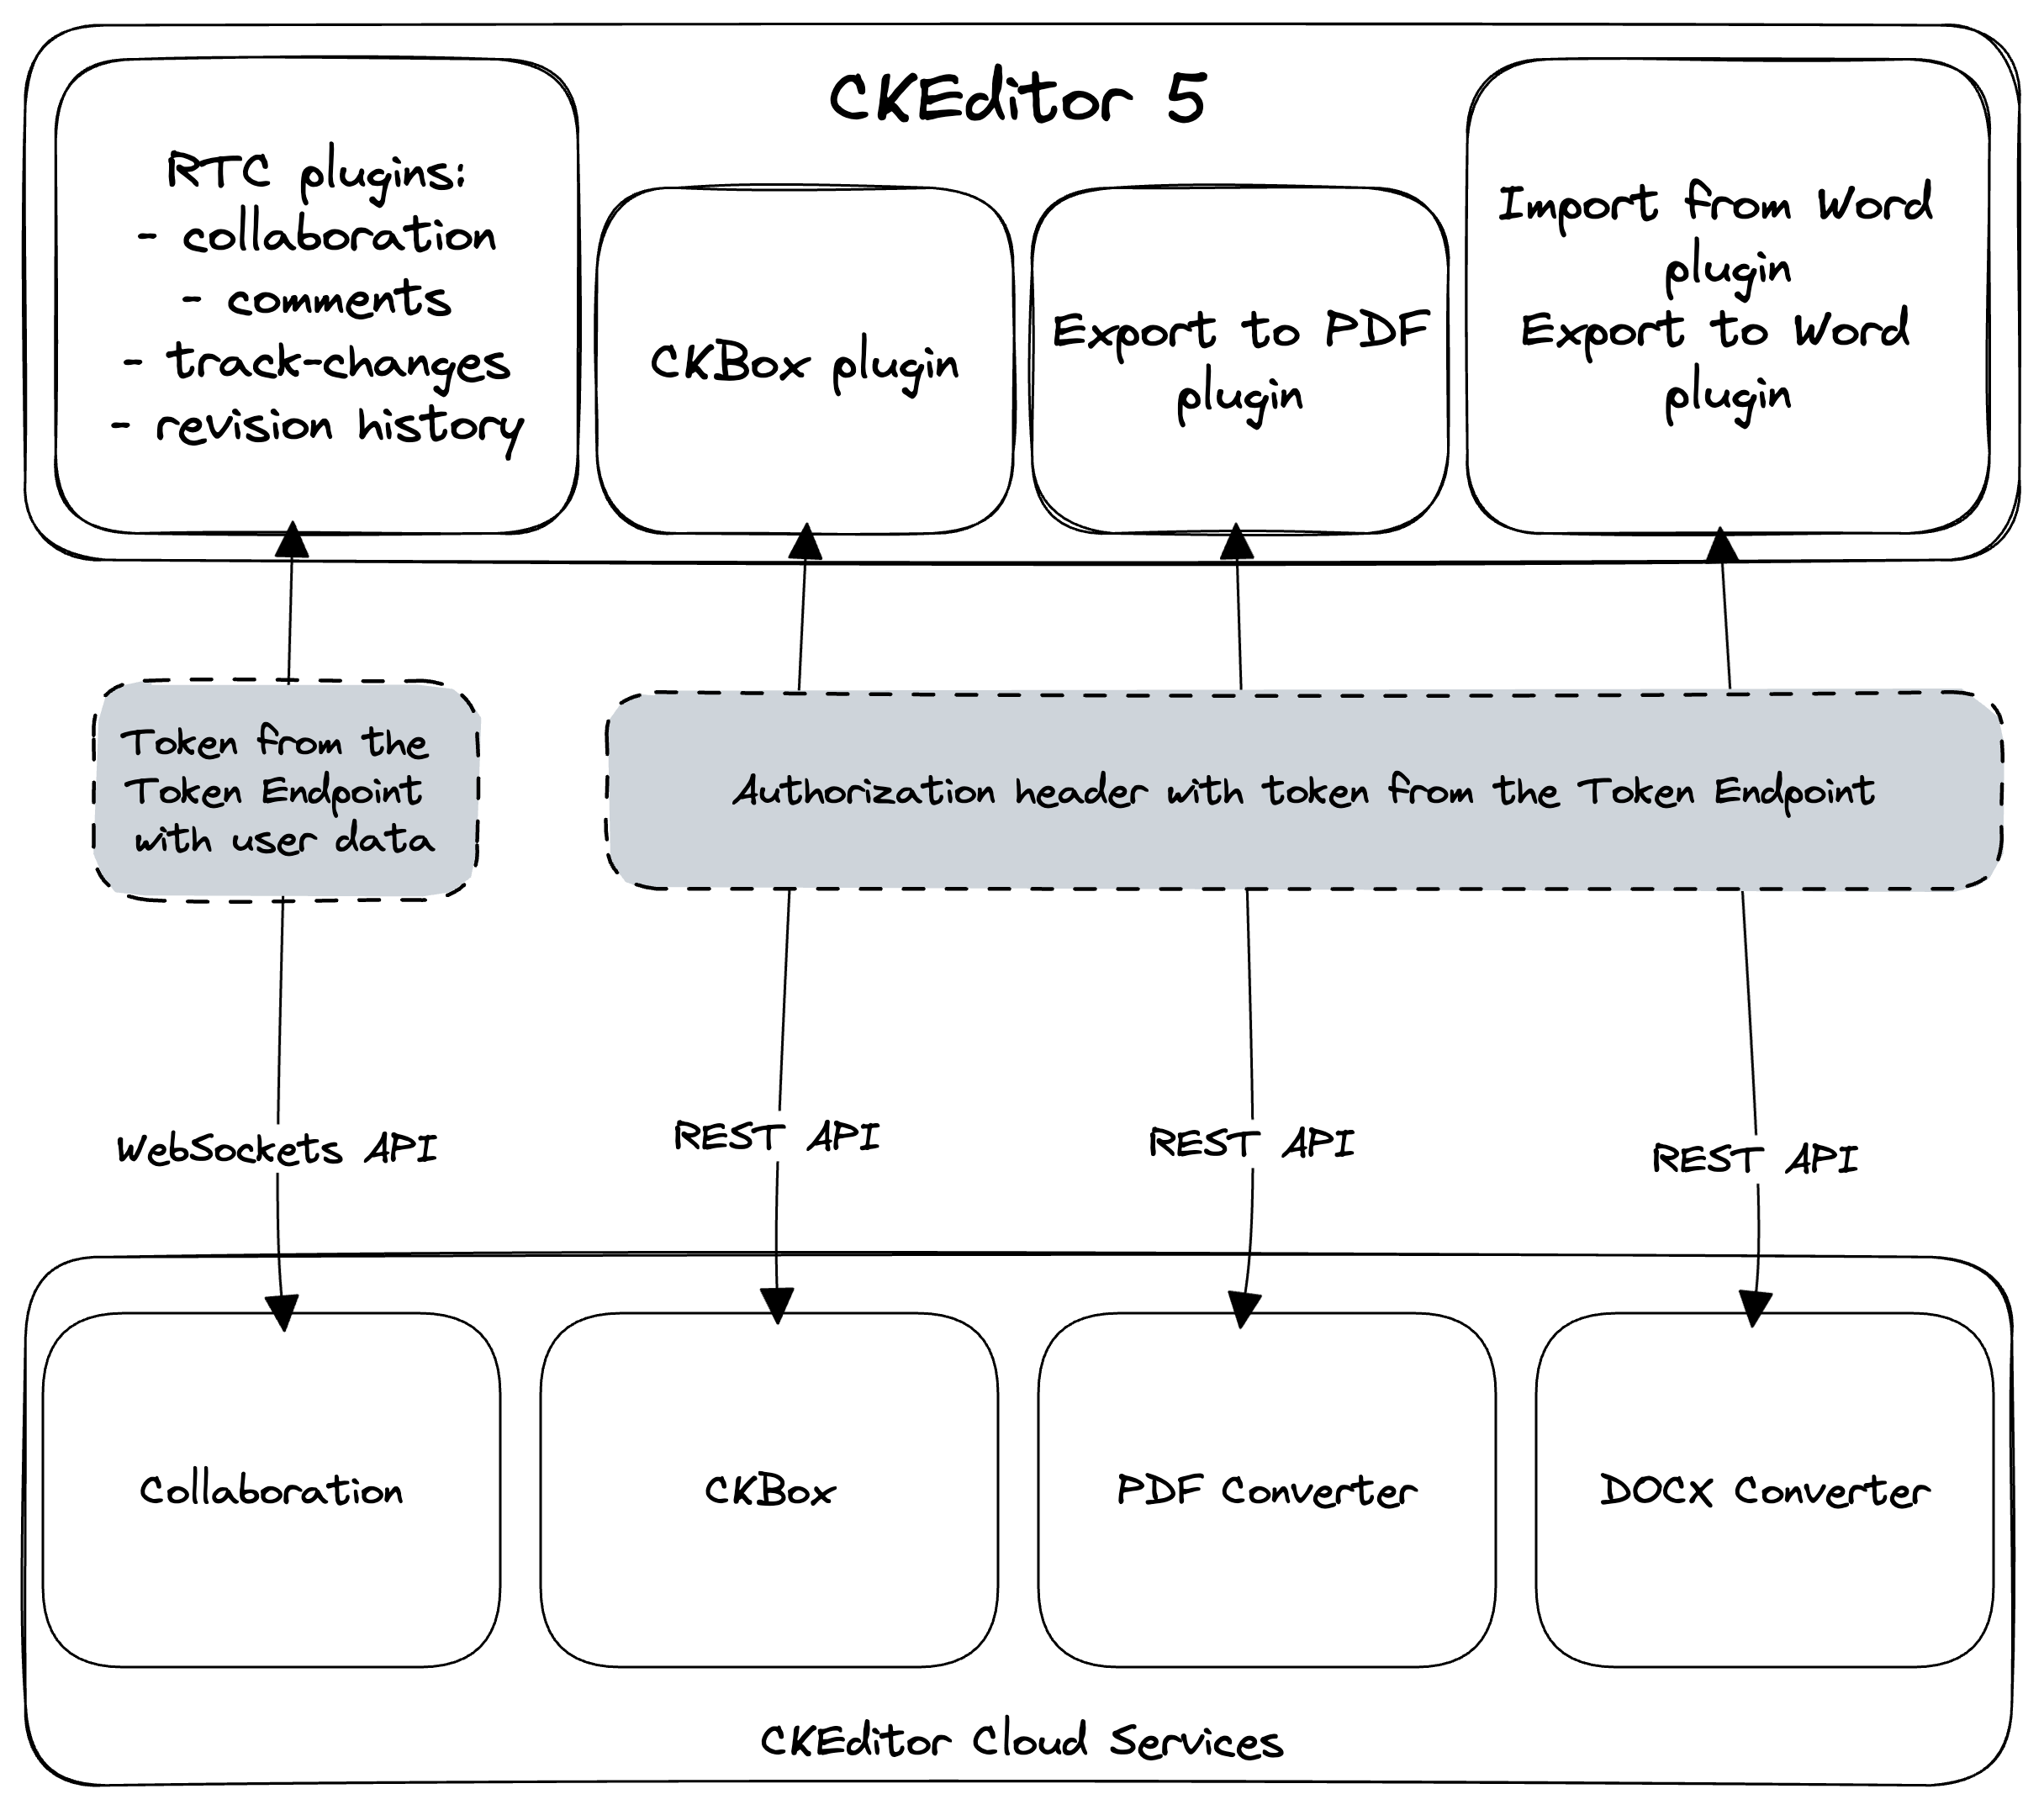 Diagram of communication between CKEditor Cloud Services and CKEditor 5 plugins.